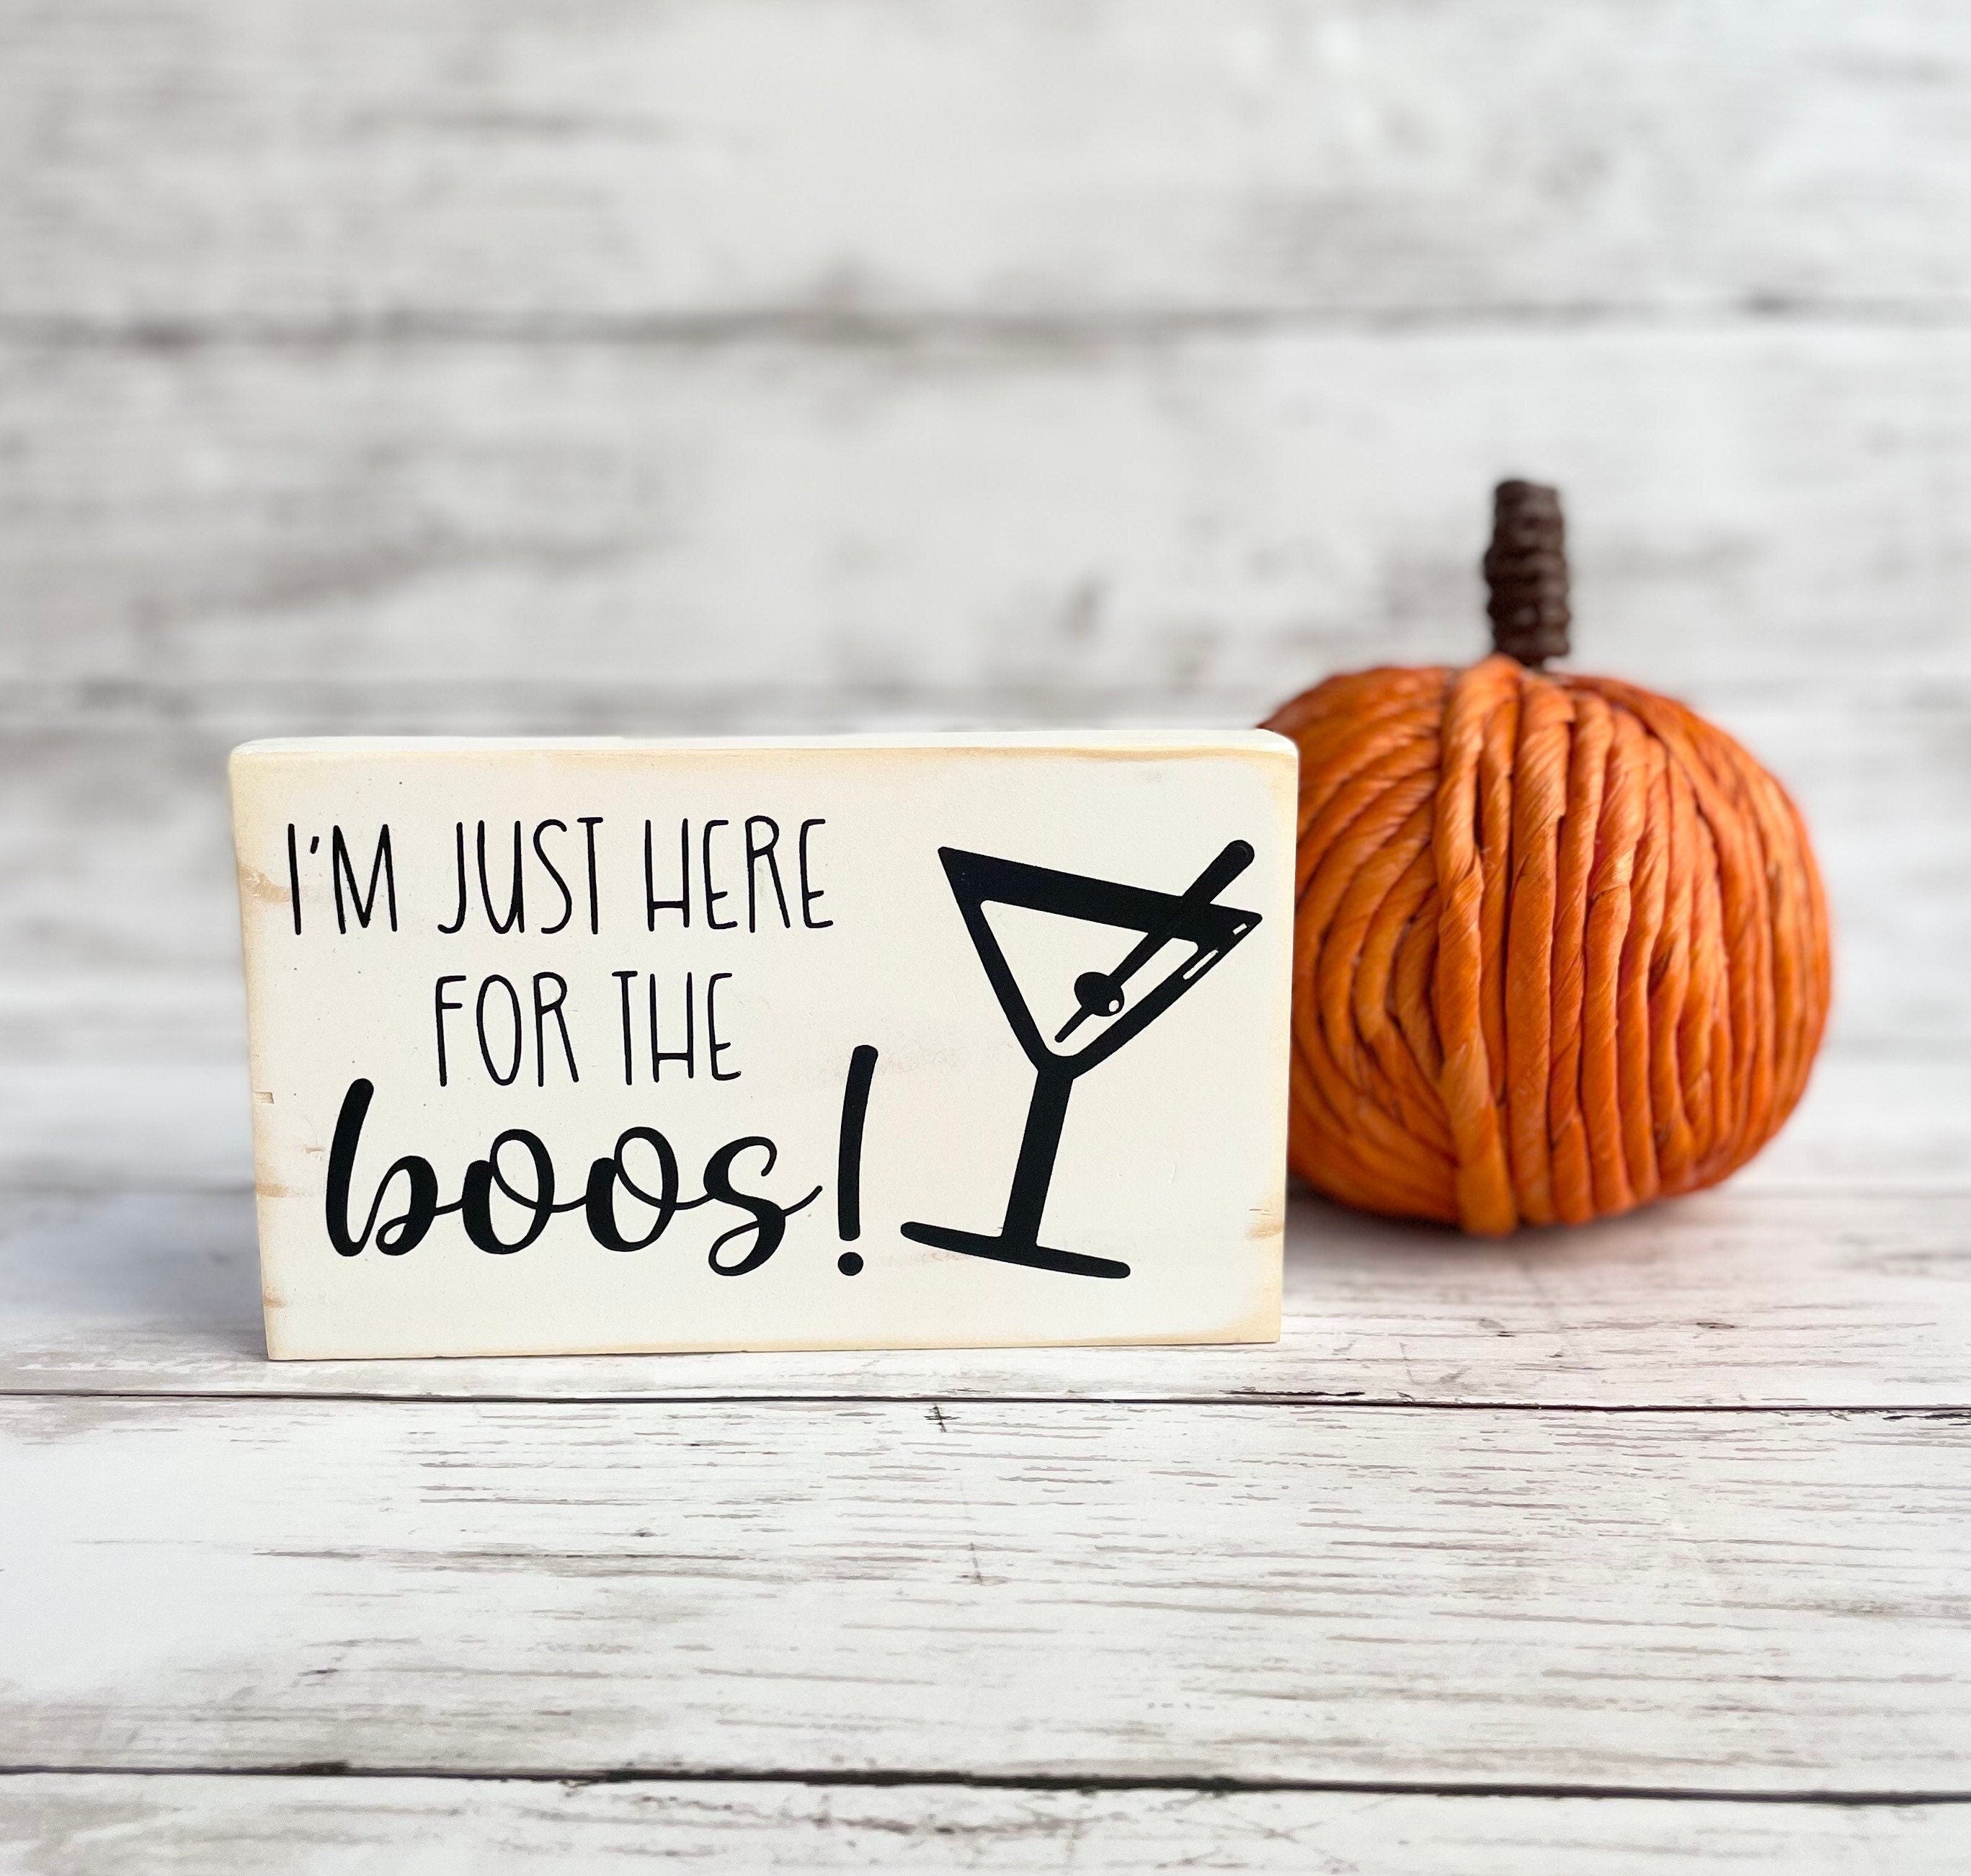 a small wood rectangular sign painted white with black lettering that reads "I'm just here for the boos!" All words are in all caps except for boos which is in a script font. The words are on the left side of the sign and an outline of a martini glass, with an olive on a toothpick, is on the right  